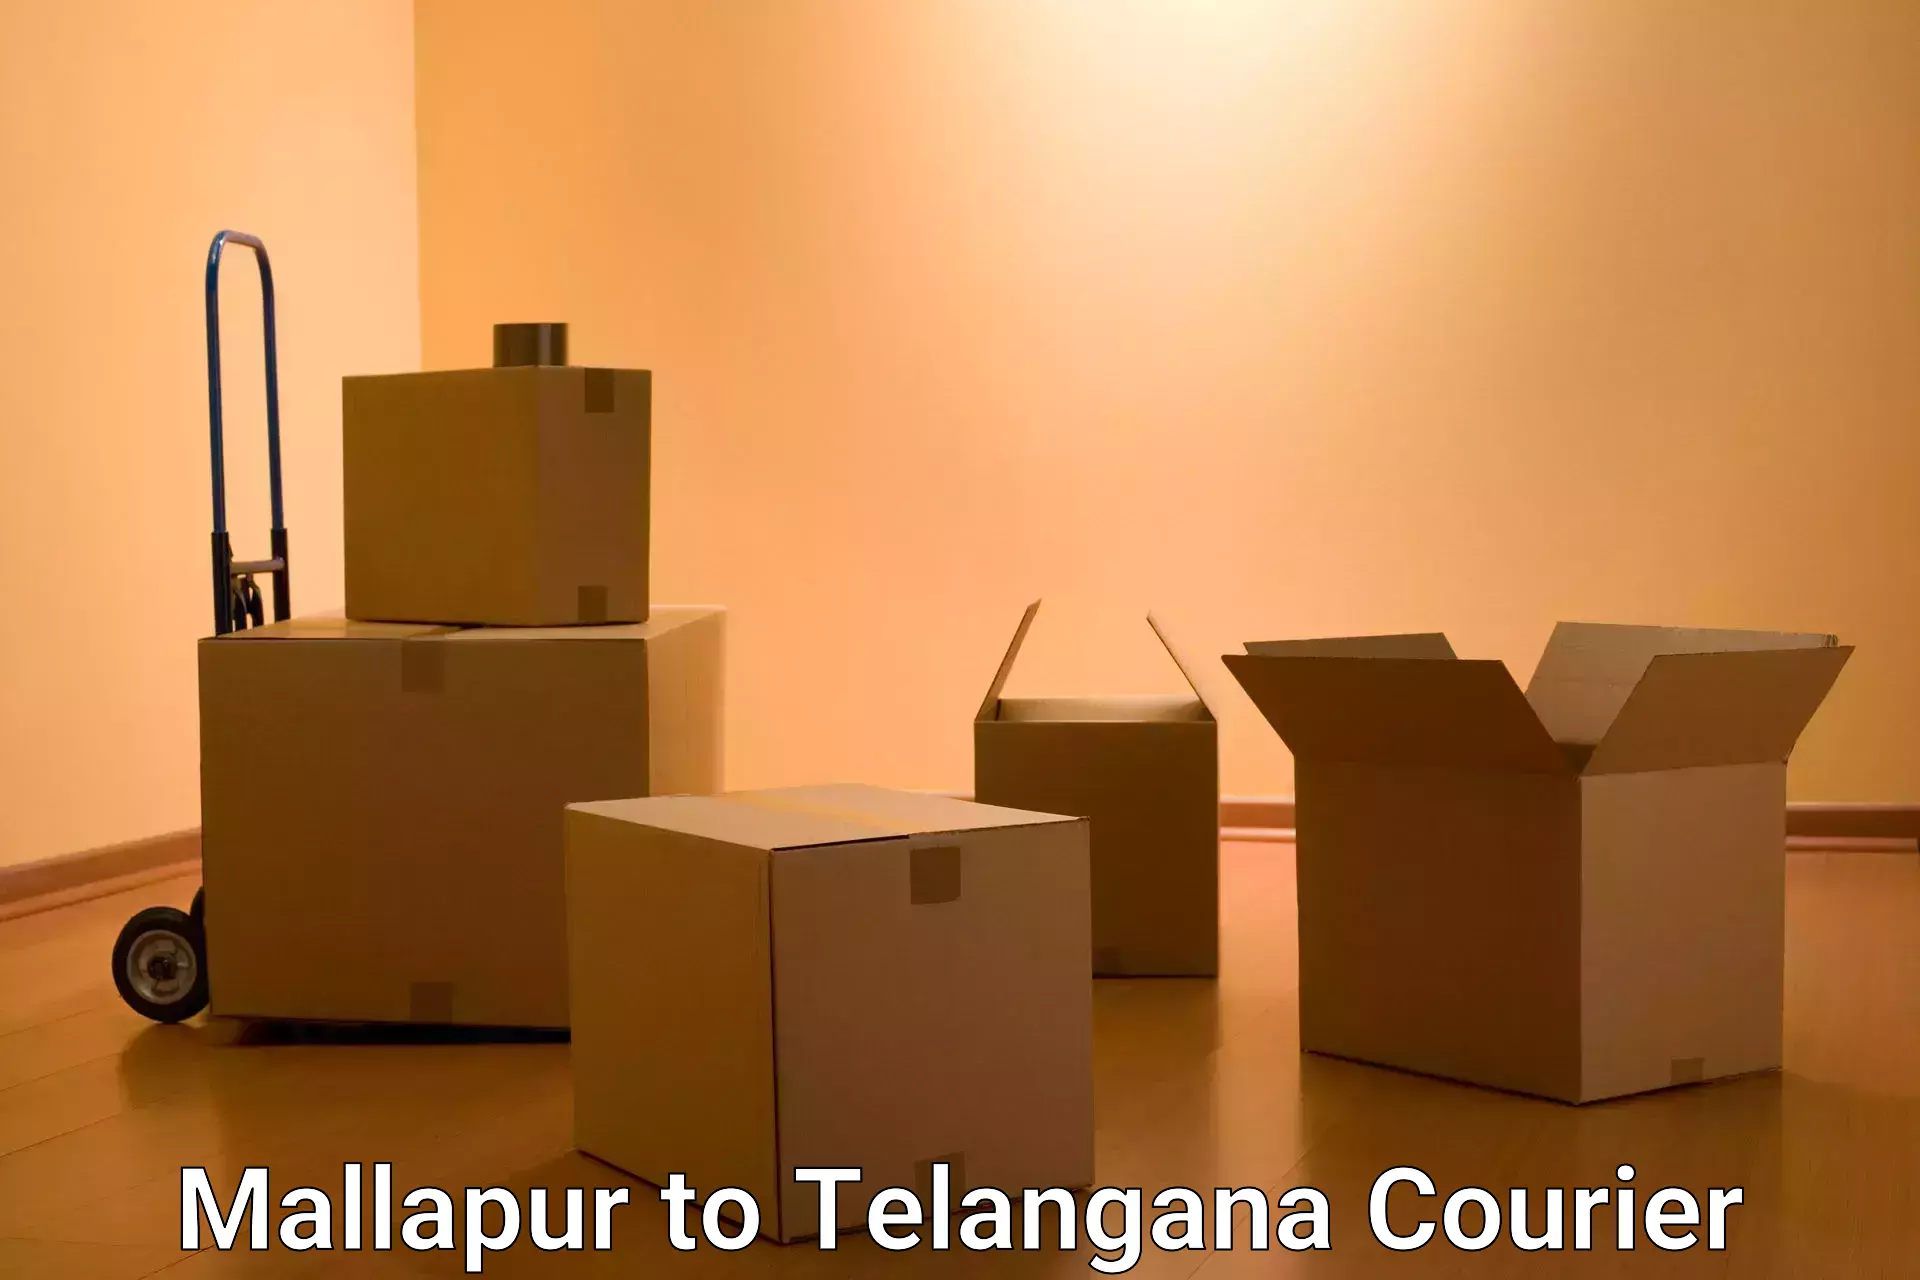 Package delivery network Mallapur to Adilabad